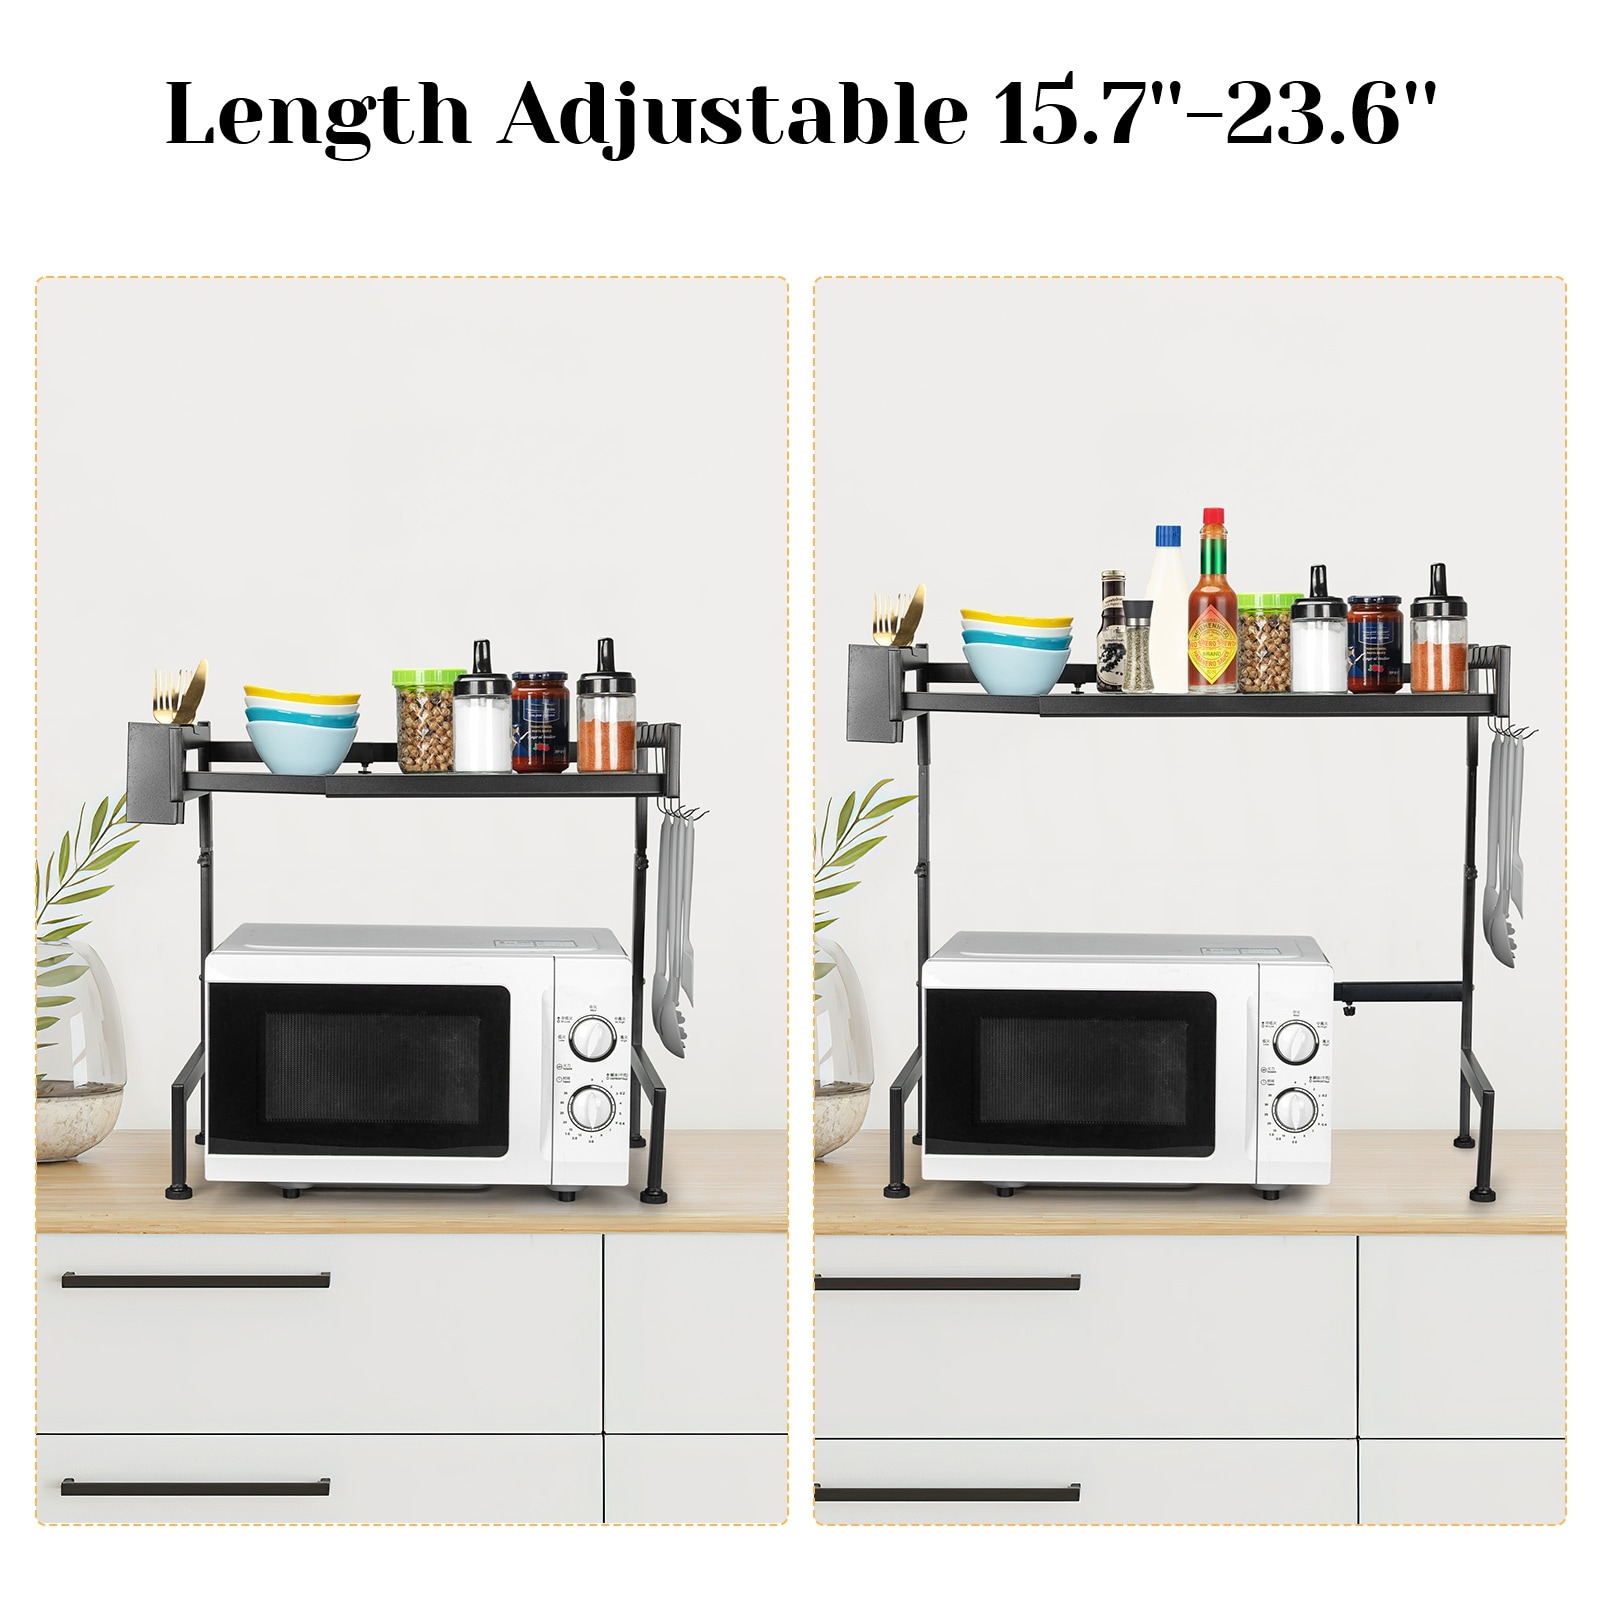 Extendable Microwave Oven Rack Adjustable Microwave Stand Kitchen